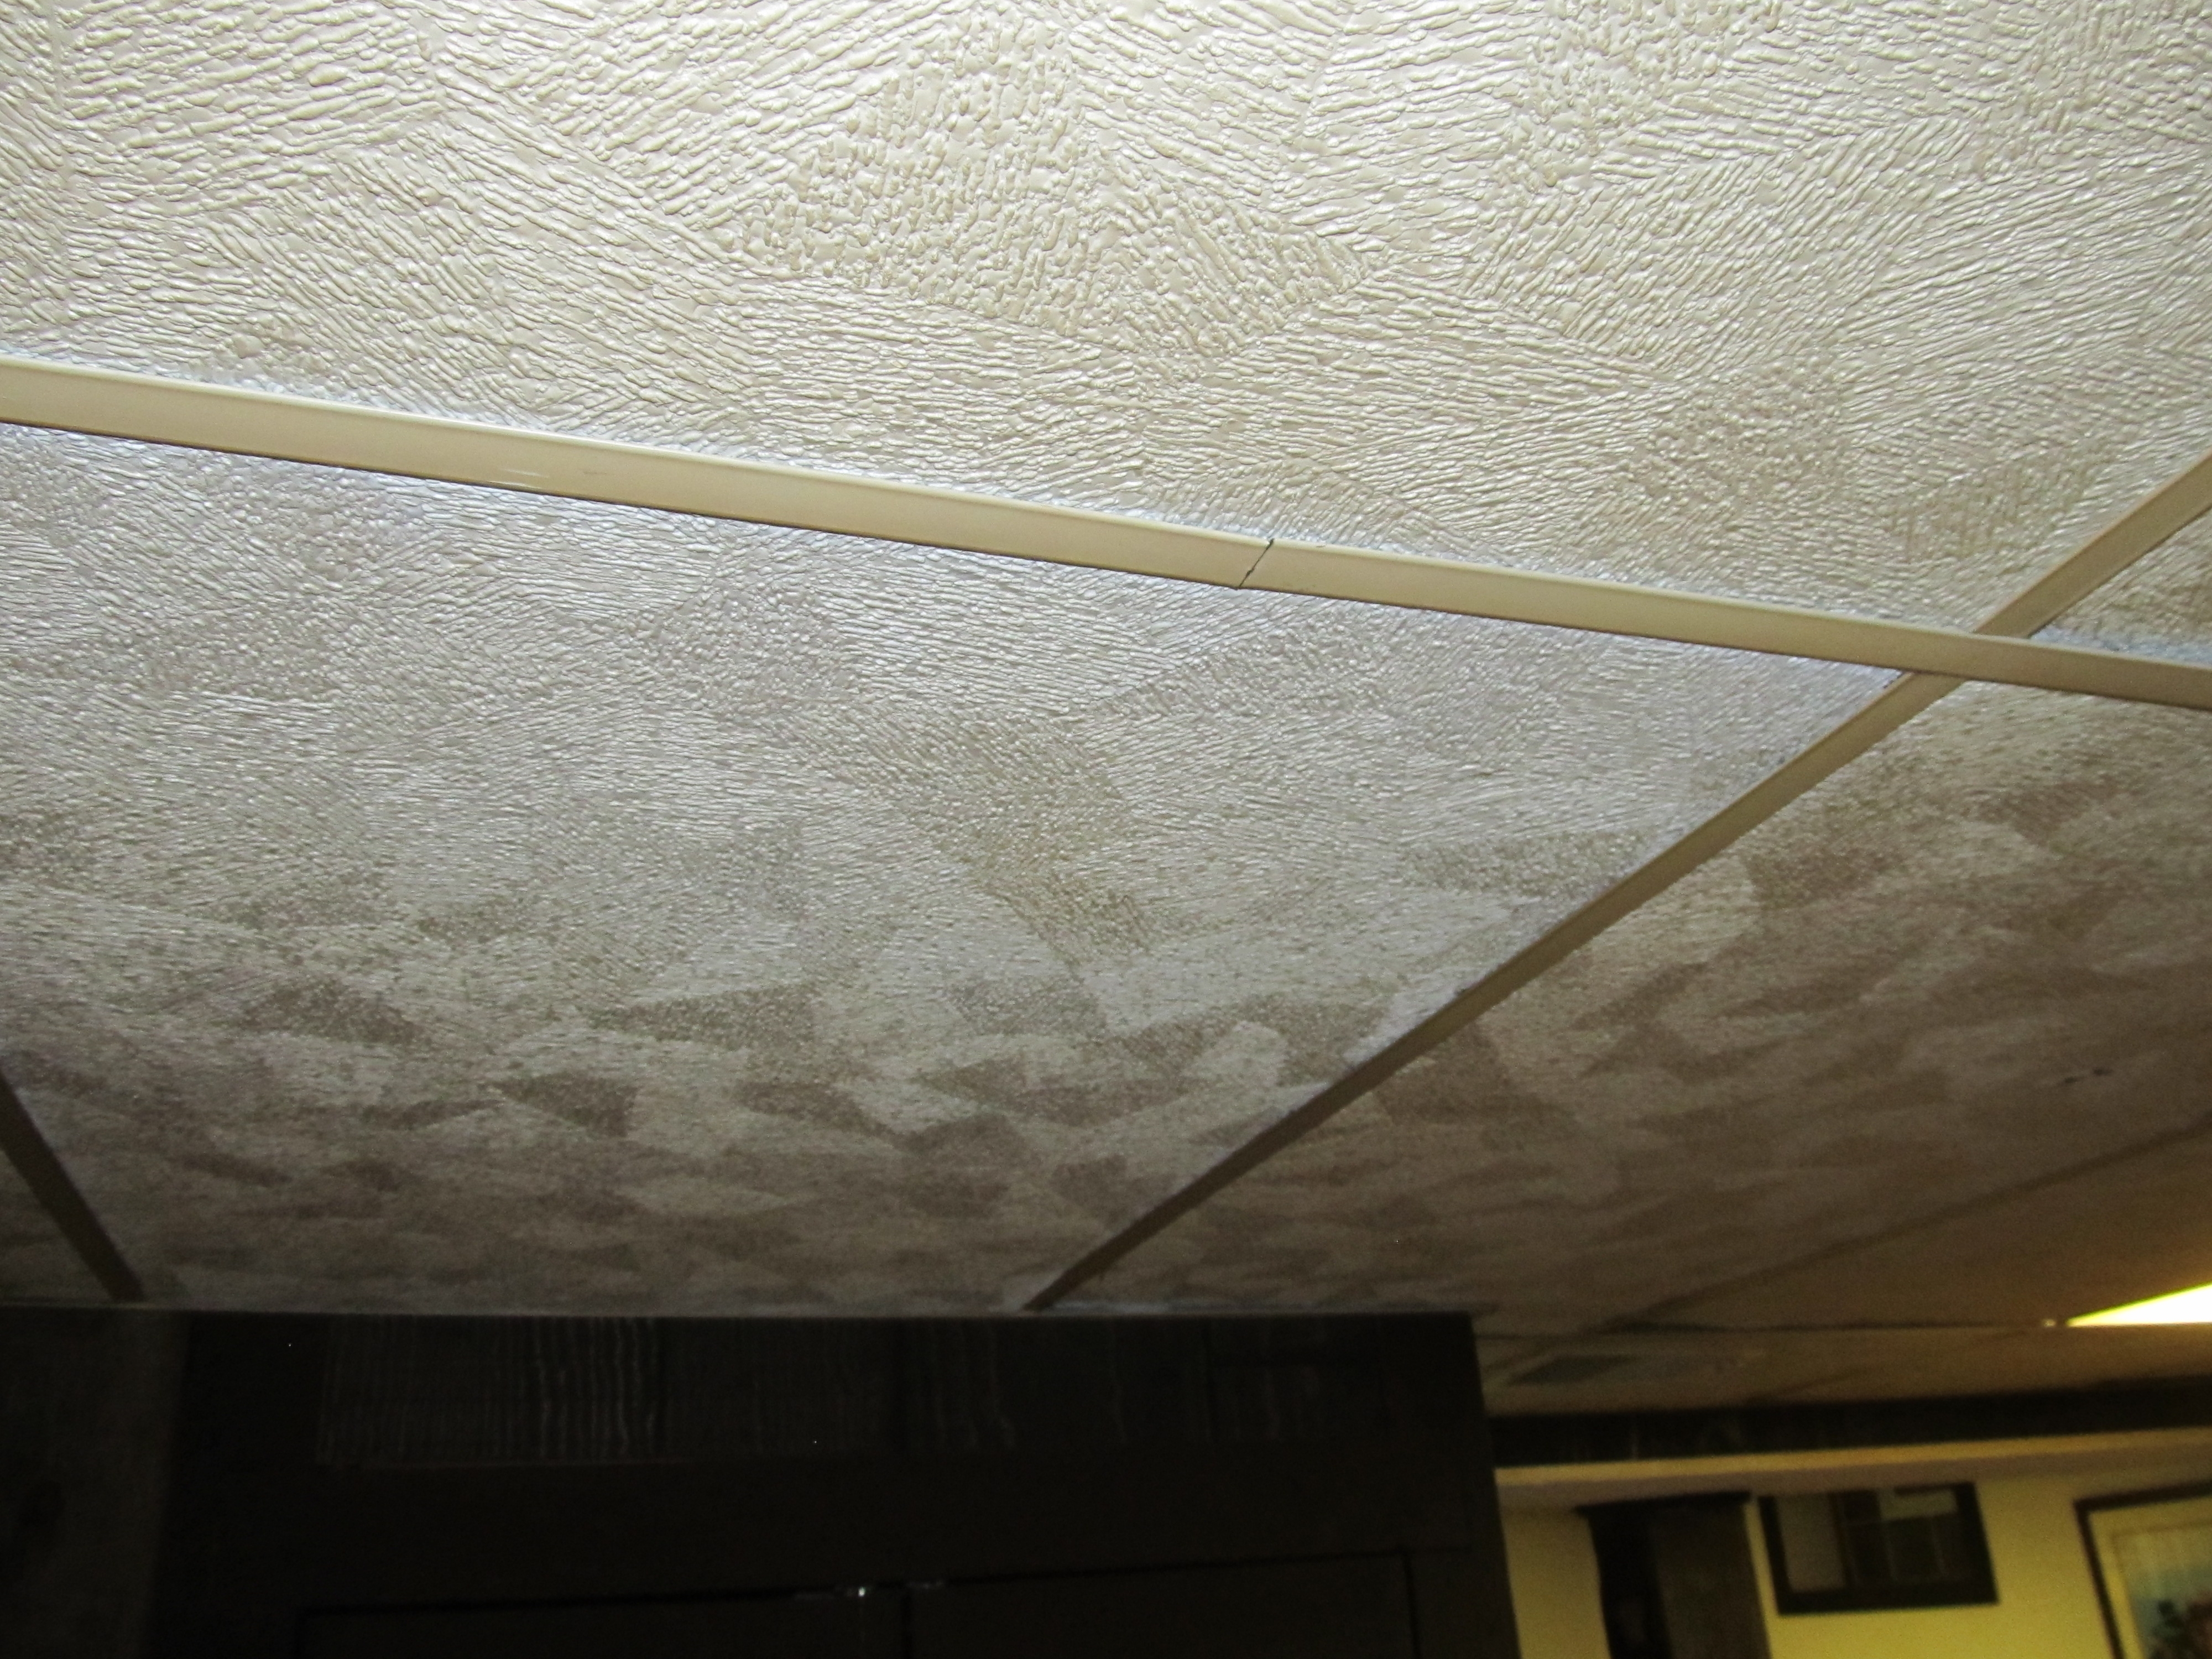 Covering Drop Ceiling Tiles With Fabric Covering Drop Ceiling Tiles With Fabric tutorial cover ugly ceiling tiles with fabric the tromp queen 4000 X 3000